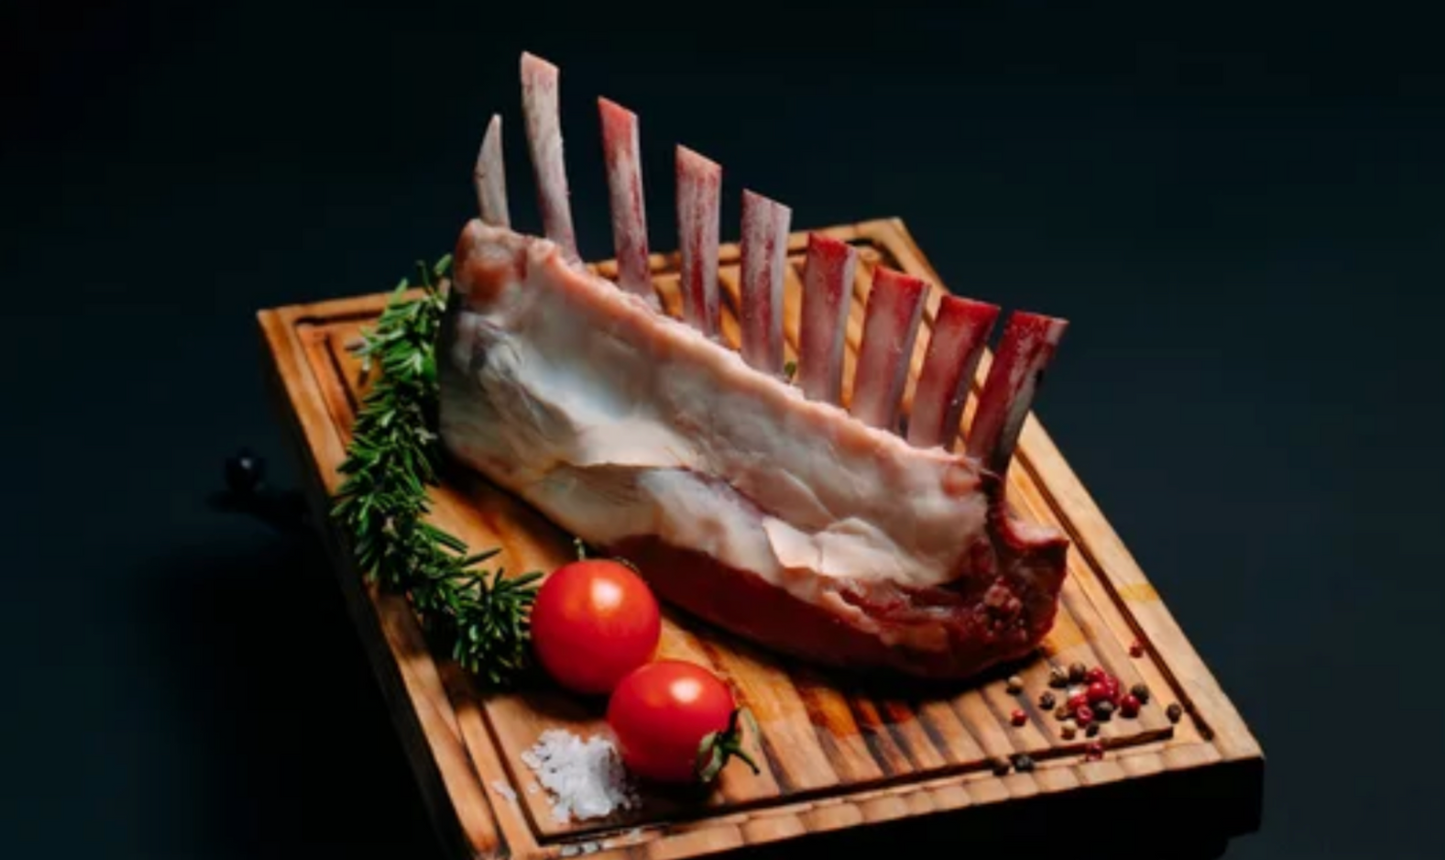 NZ Frenched Rack of Lamb Roast